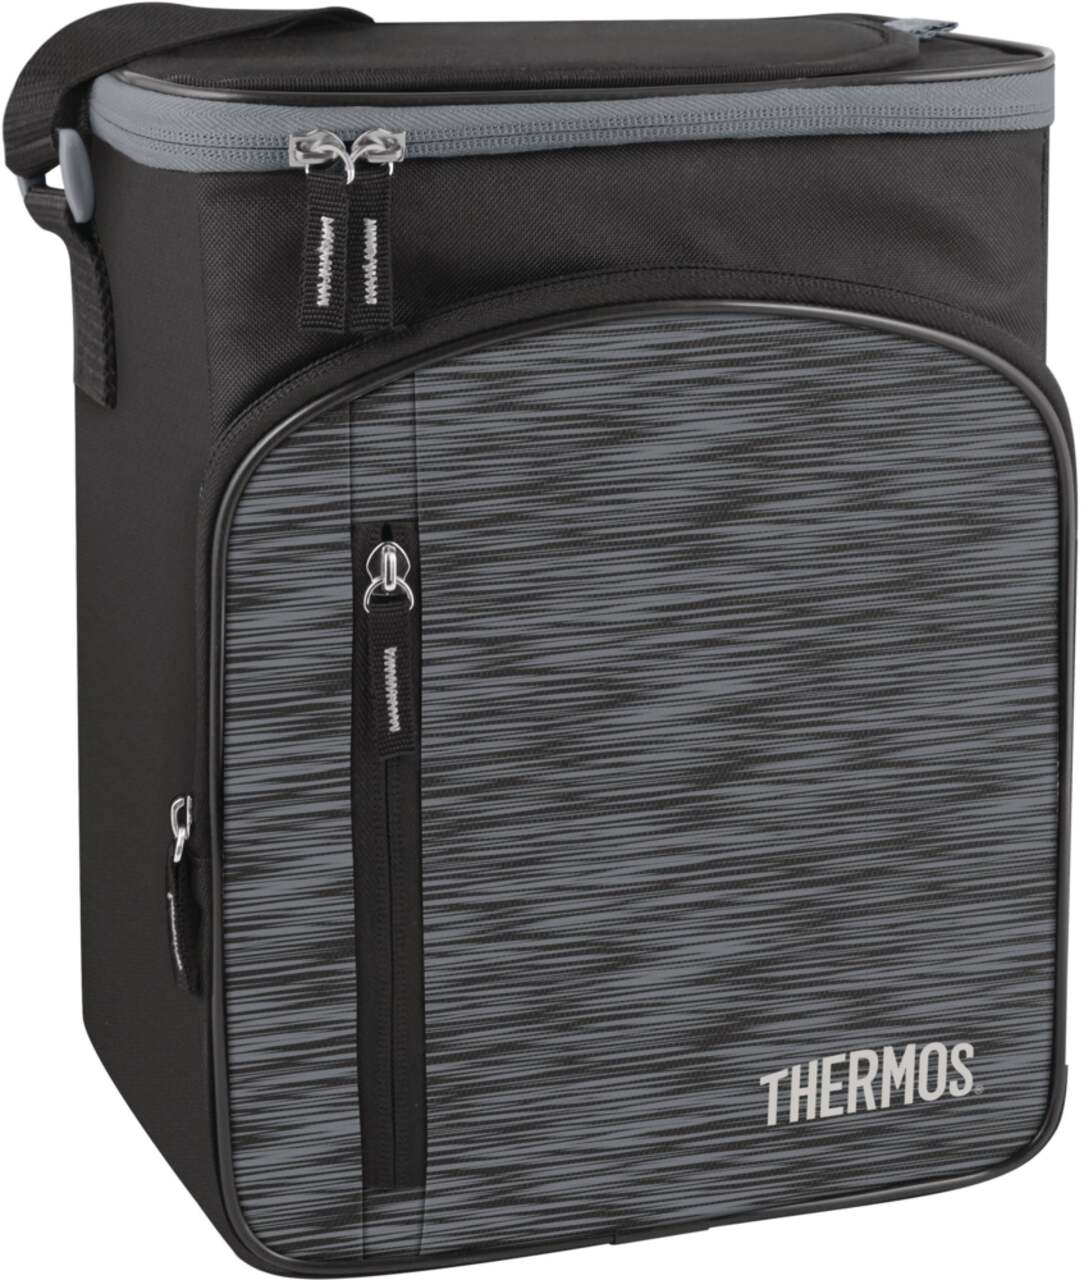 https://media-www.canadiantire.ca/product/living/kitchen/food-storage/1429252/thermos-athleisure-large-lunch-bag-4e5ffbe5-c478-4597-8d73-4344b879df52.png?imdensity=1&imwidth=640&impolicy=mZoom